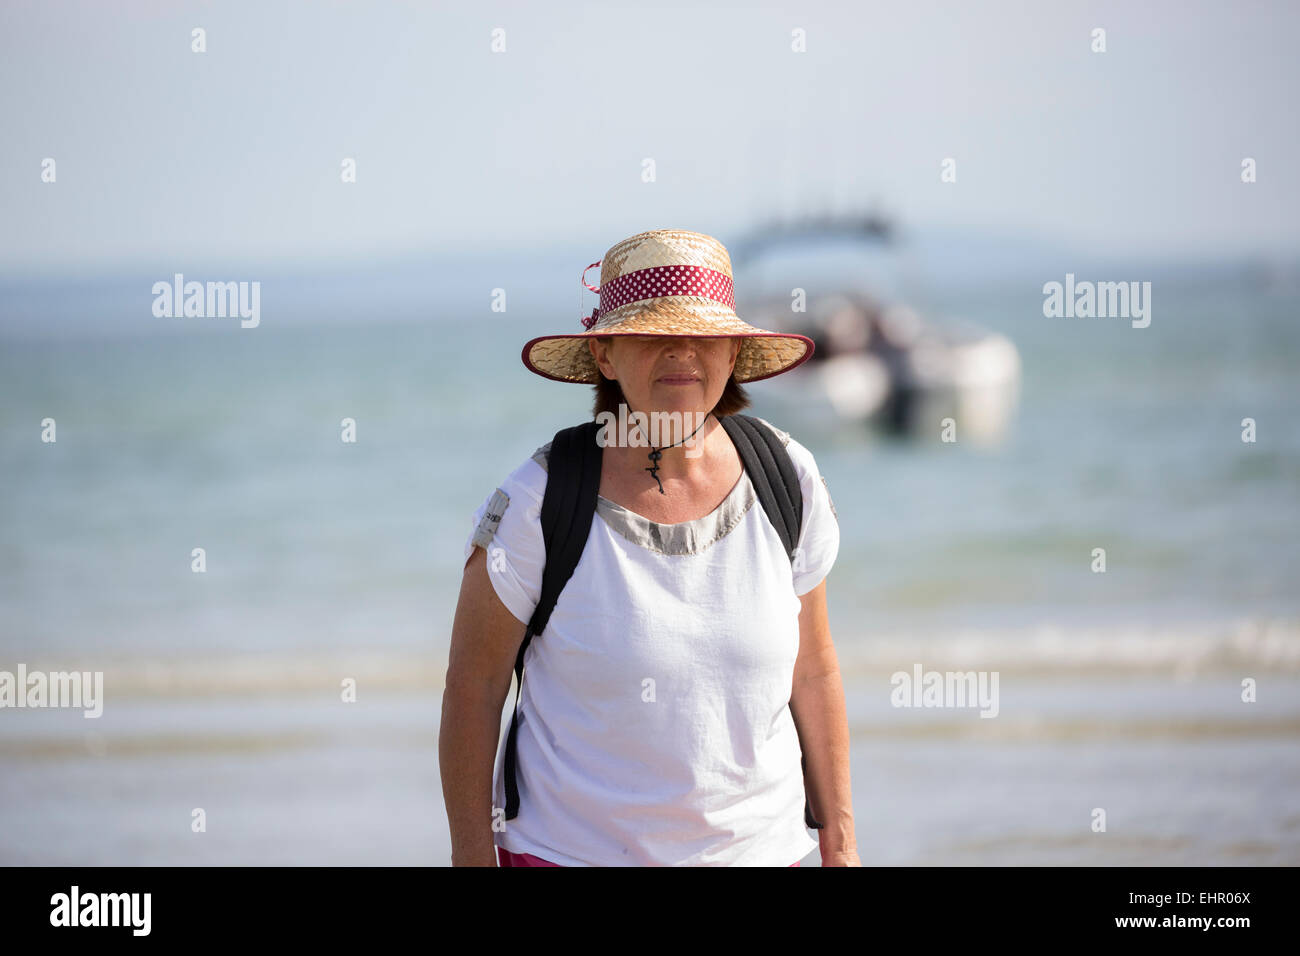 Adult woman standing in water. Stock Photo